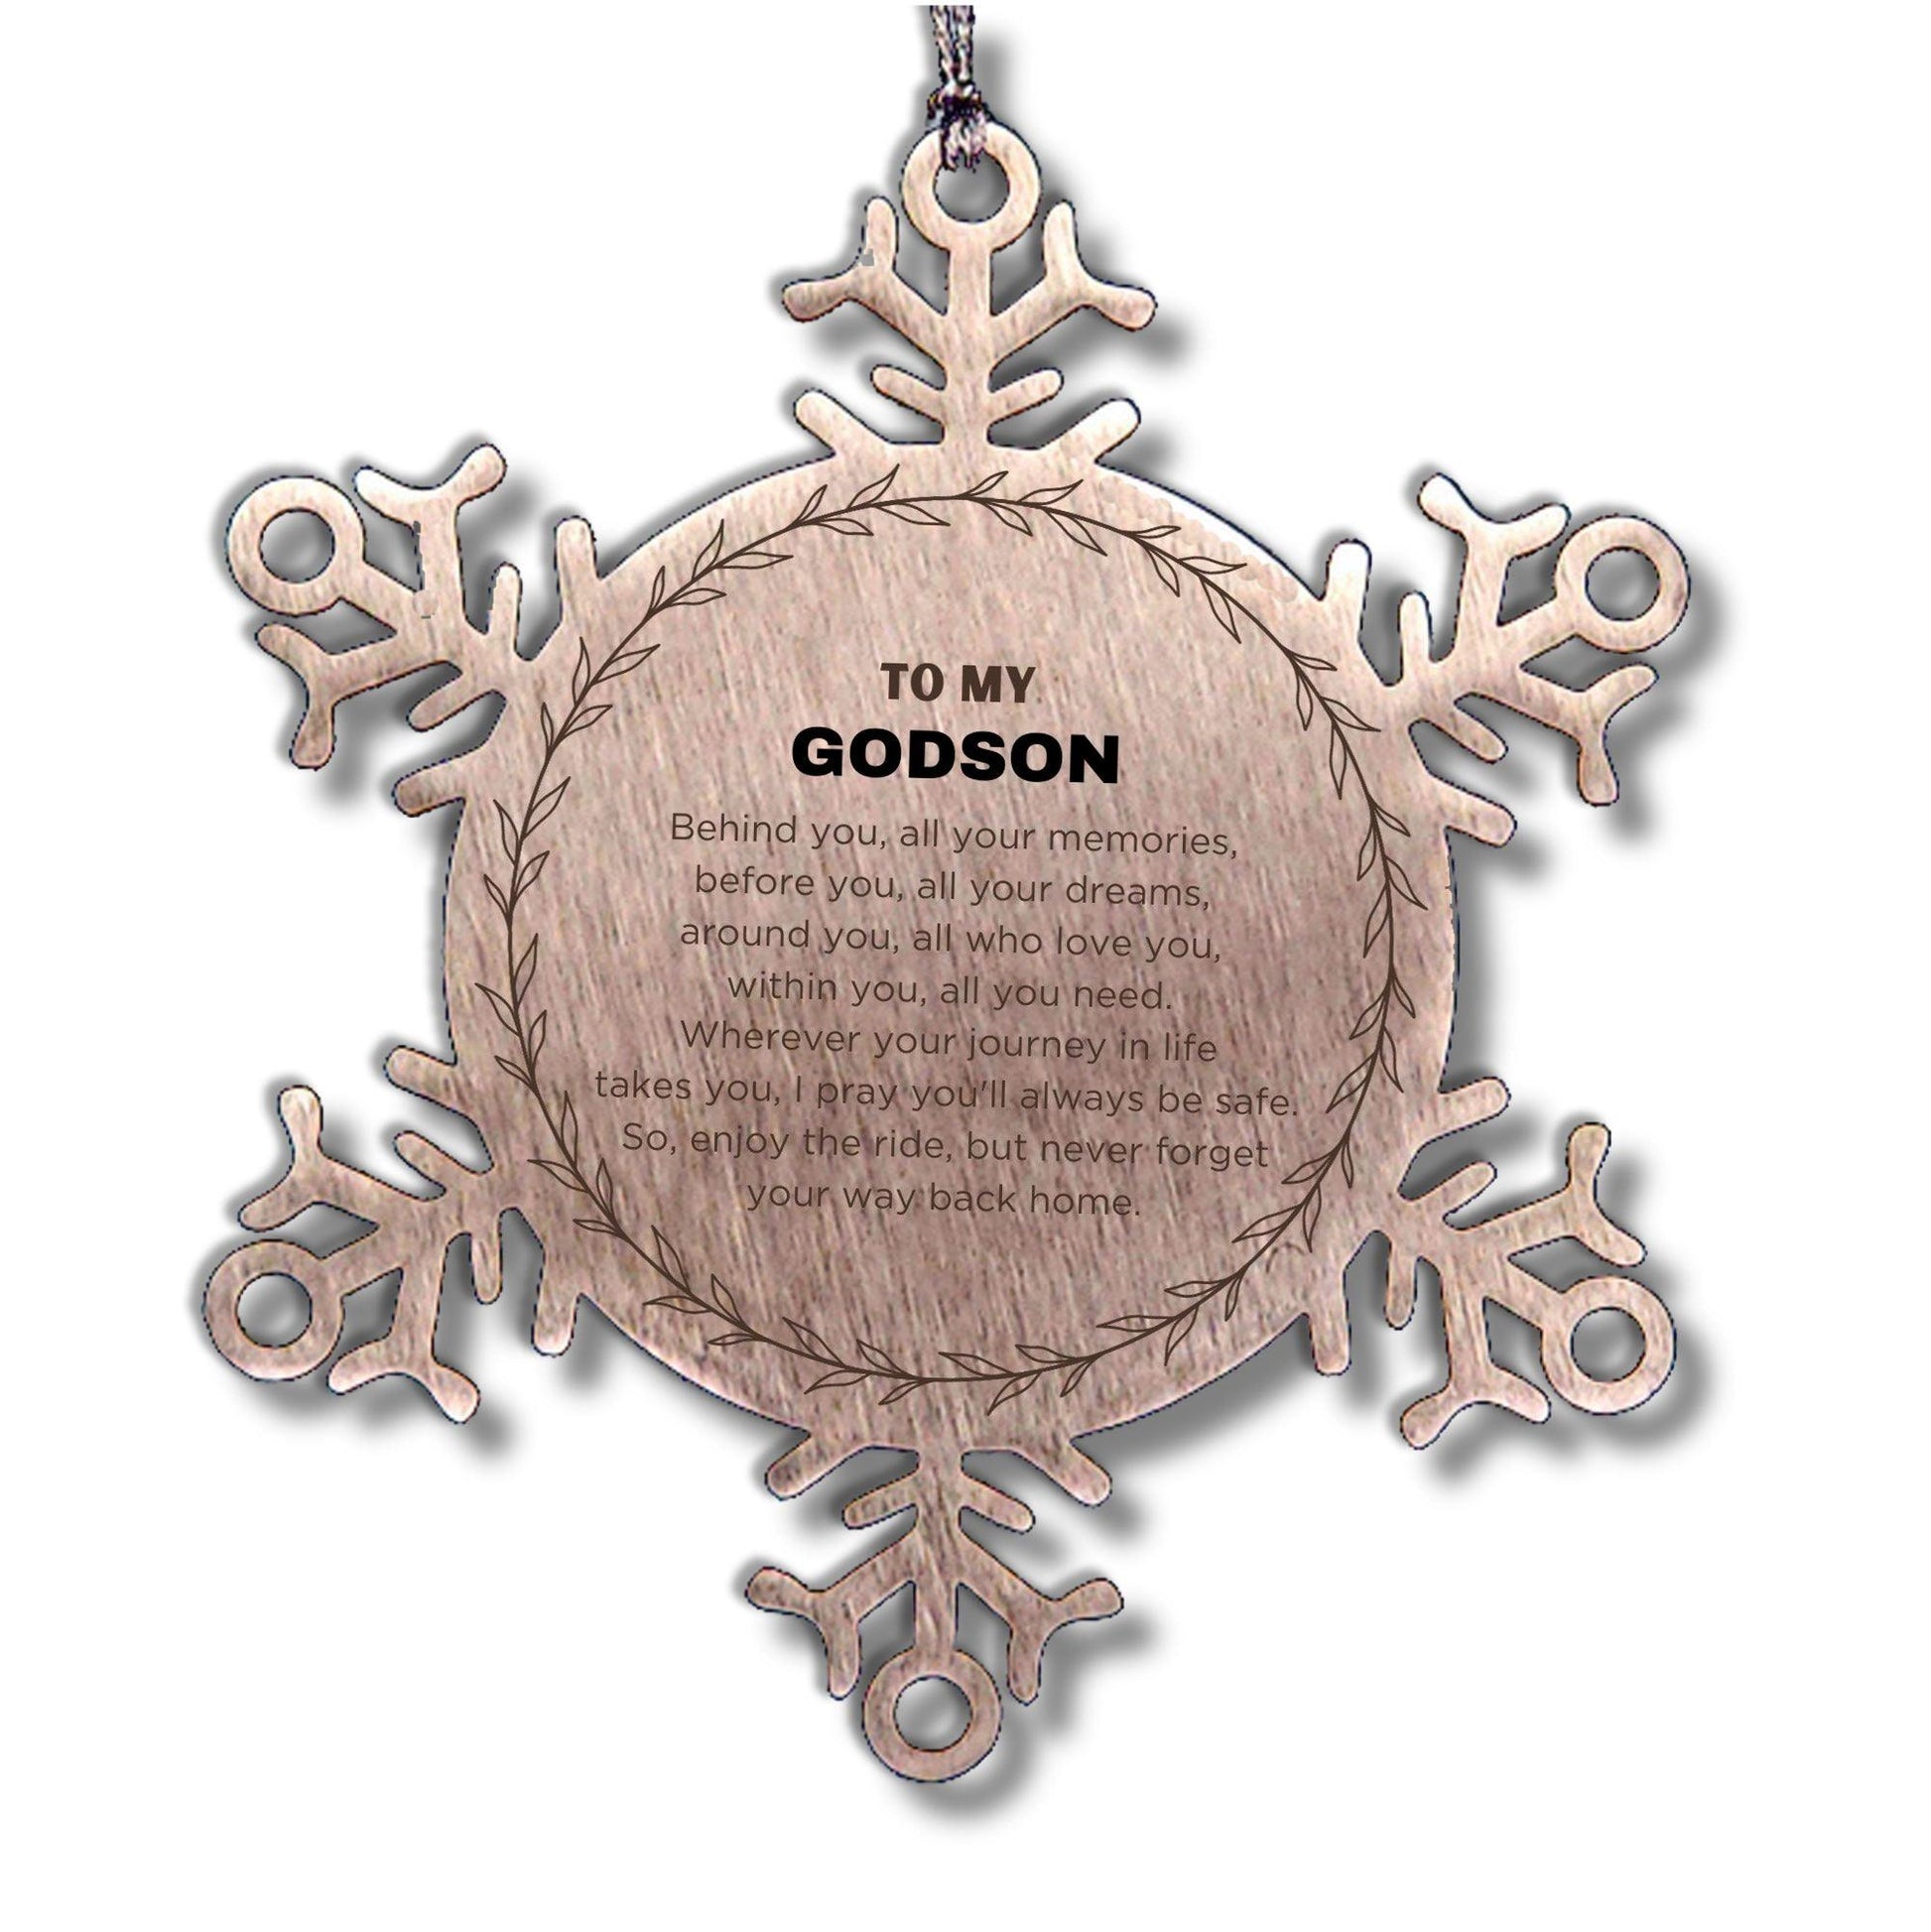 Inspirational Godson Snowflake Ornament - Behind you, all your Memories, Before you, all your Dreams - Birthday, Christmas Holiday Gifts - Mallard Moon Gift Shop